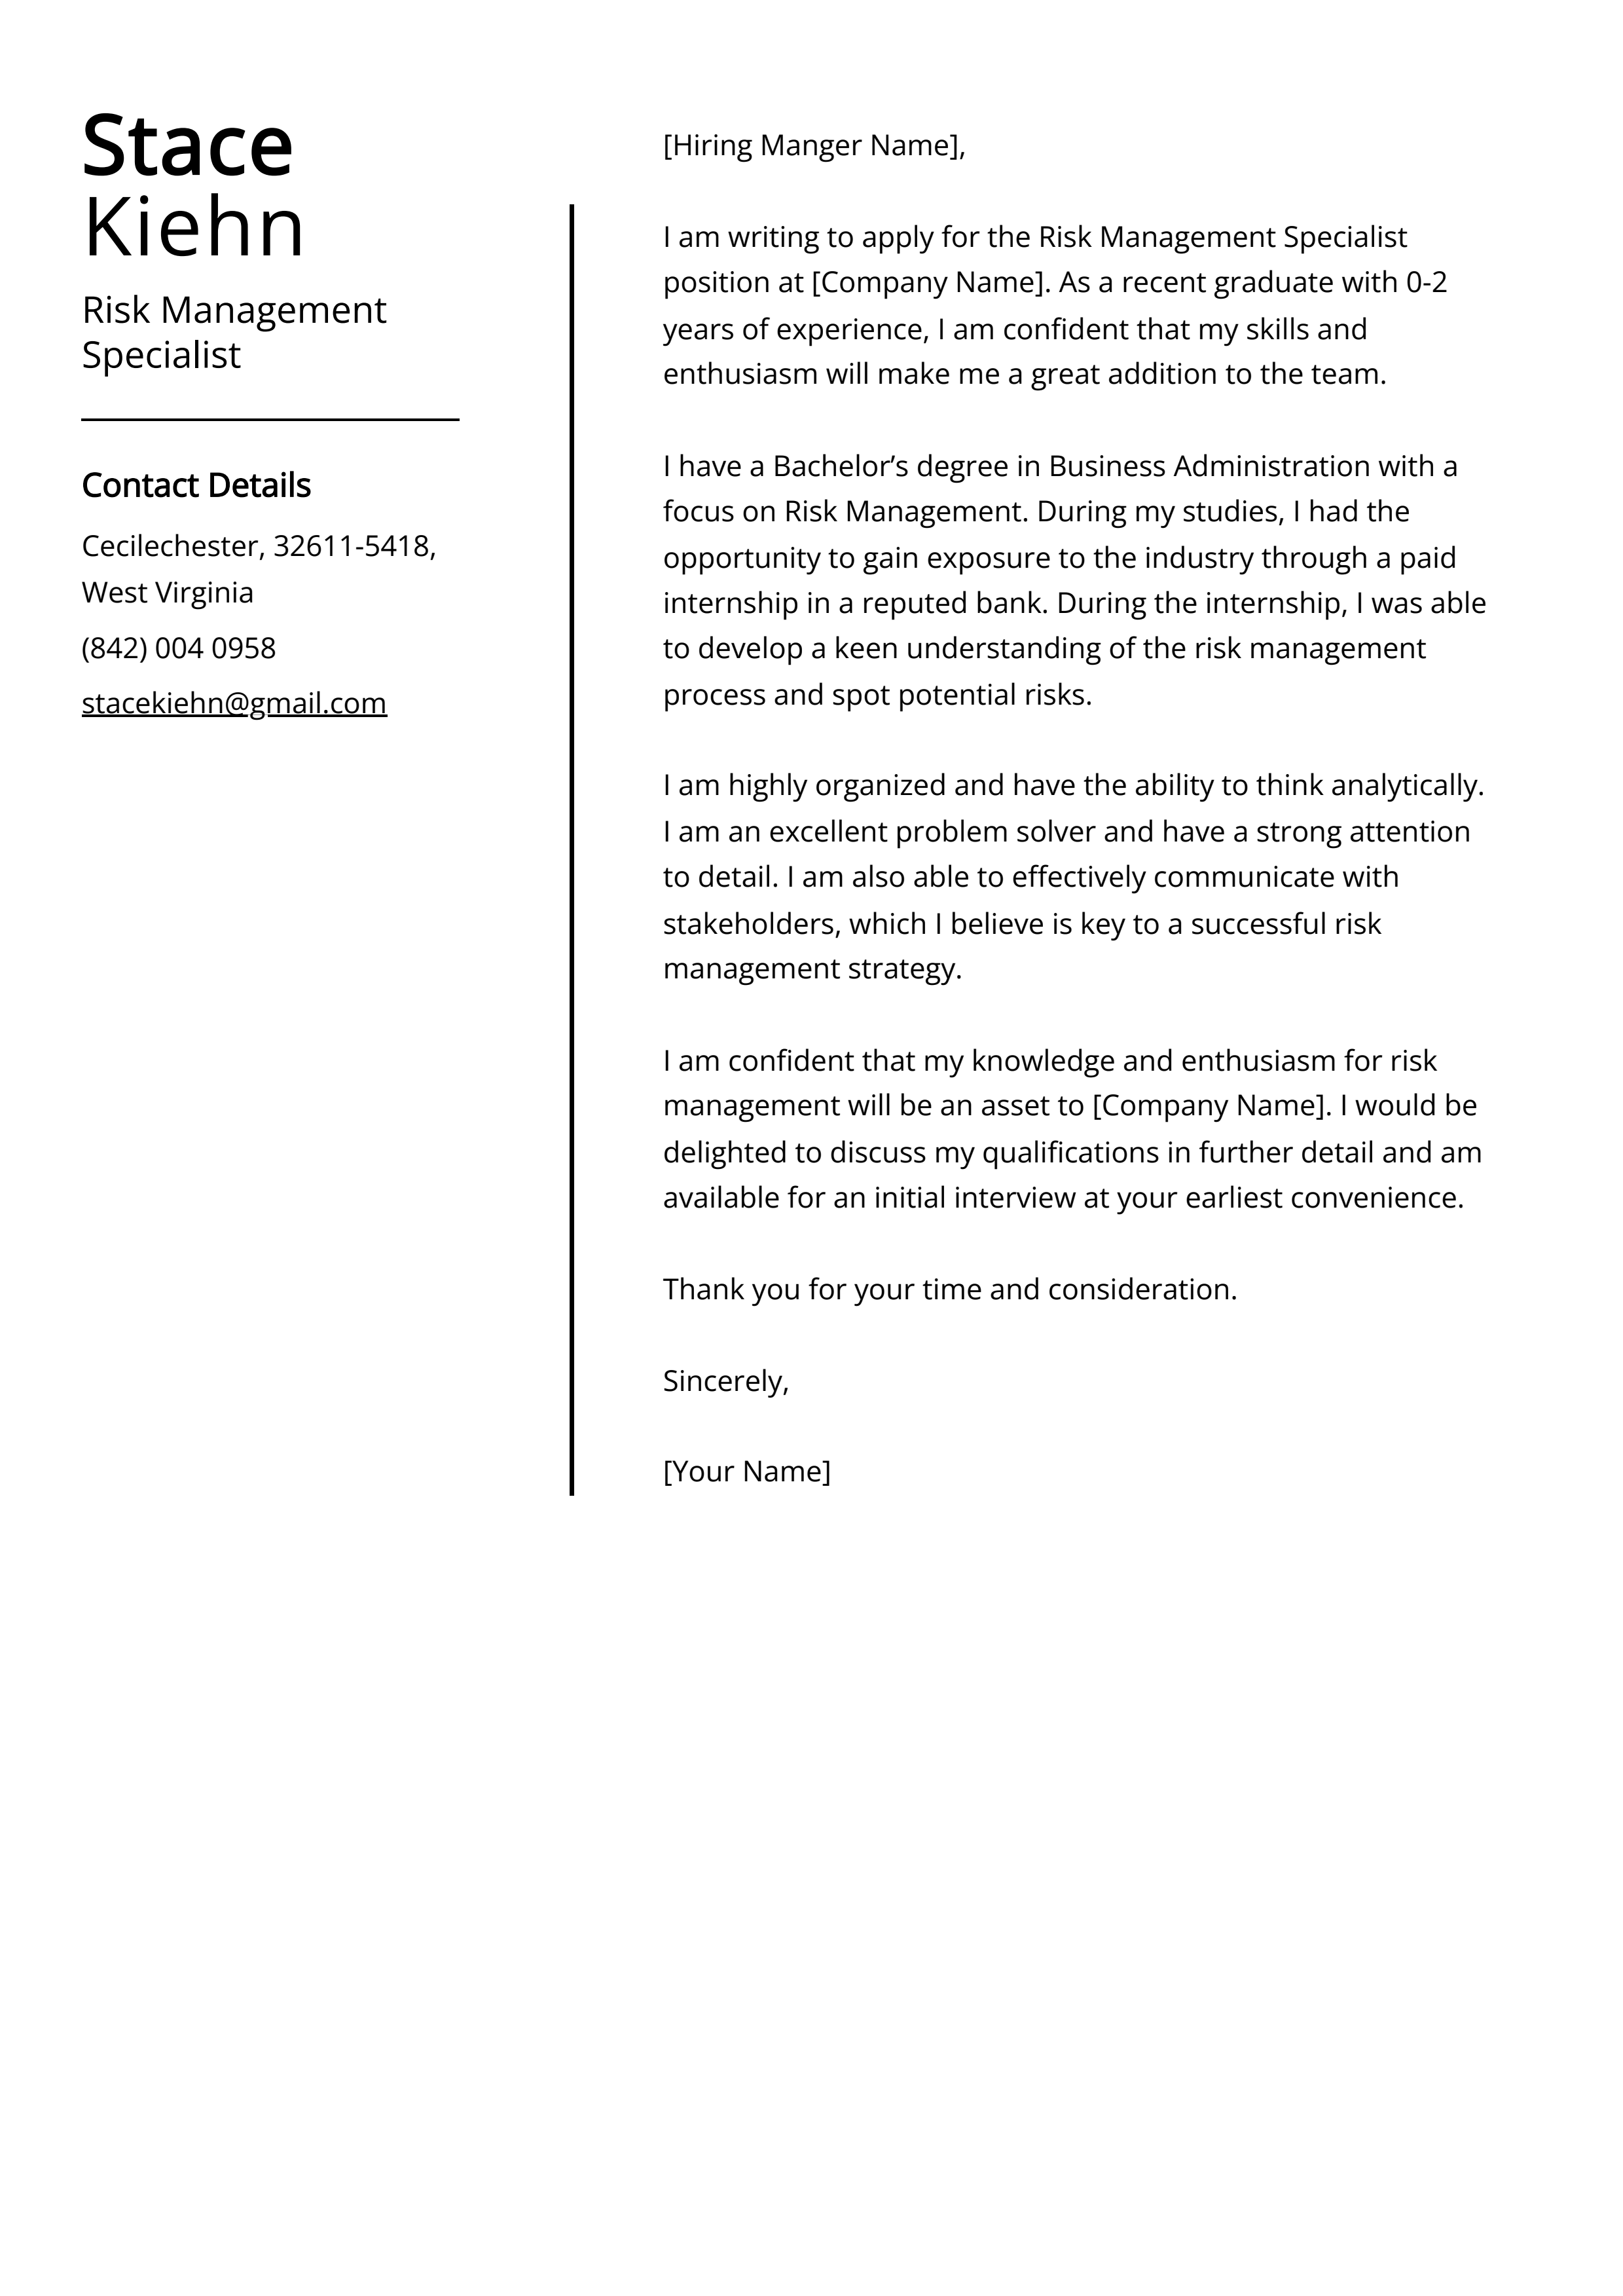 Risk Management Specialist Cover Letter Example